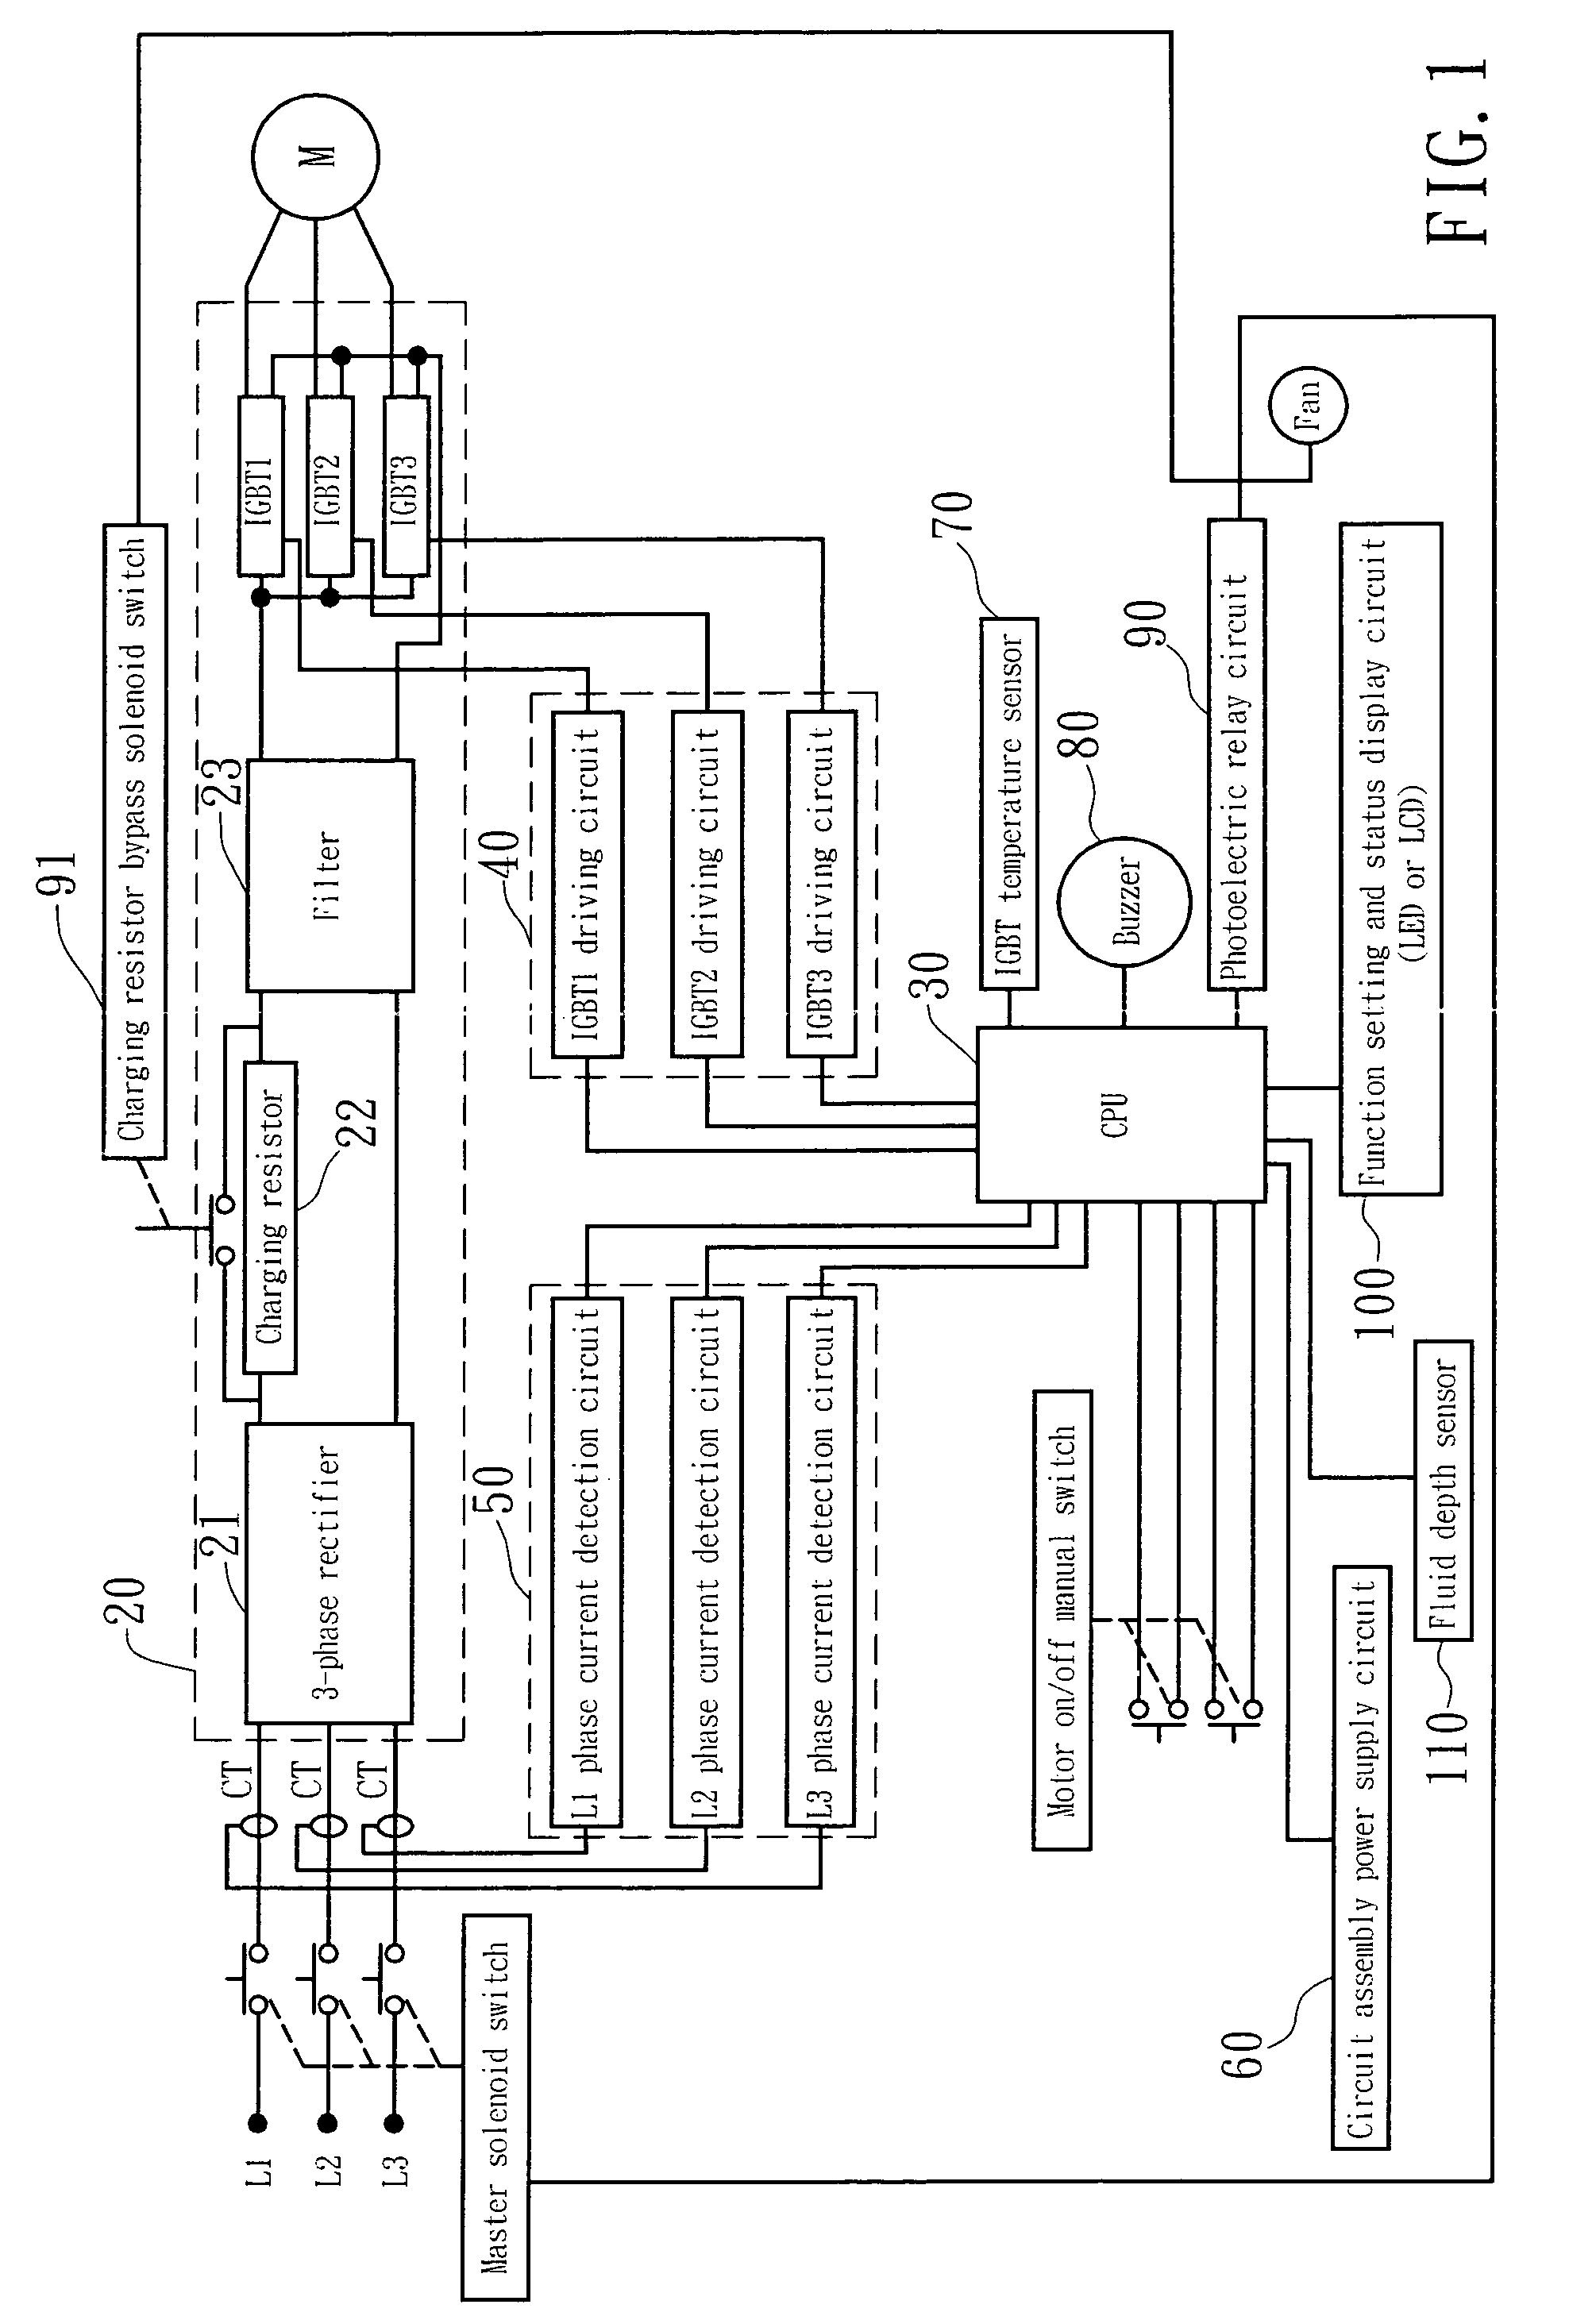 Linear motor automatic control circuit assembly for controlling the operation of a 3-phase linear motor-driven submersible oil pump of an artificial oil lift system